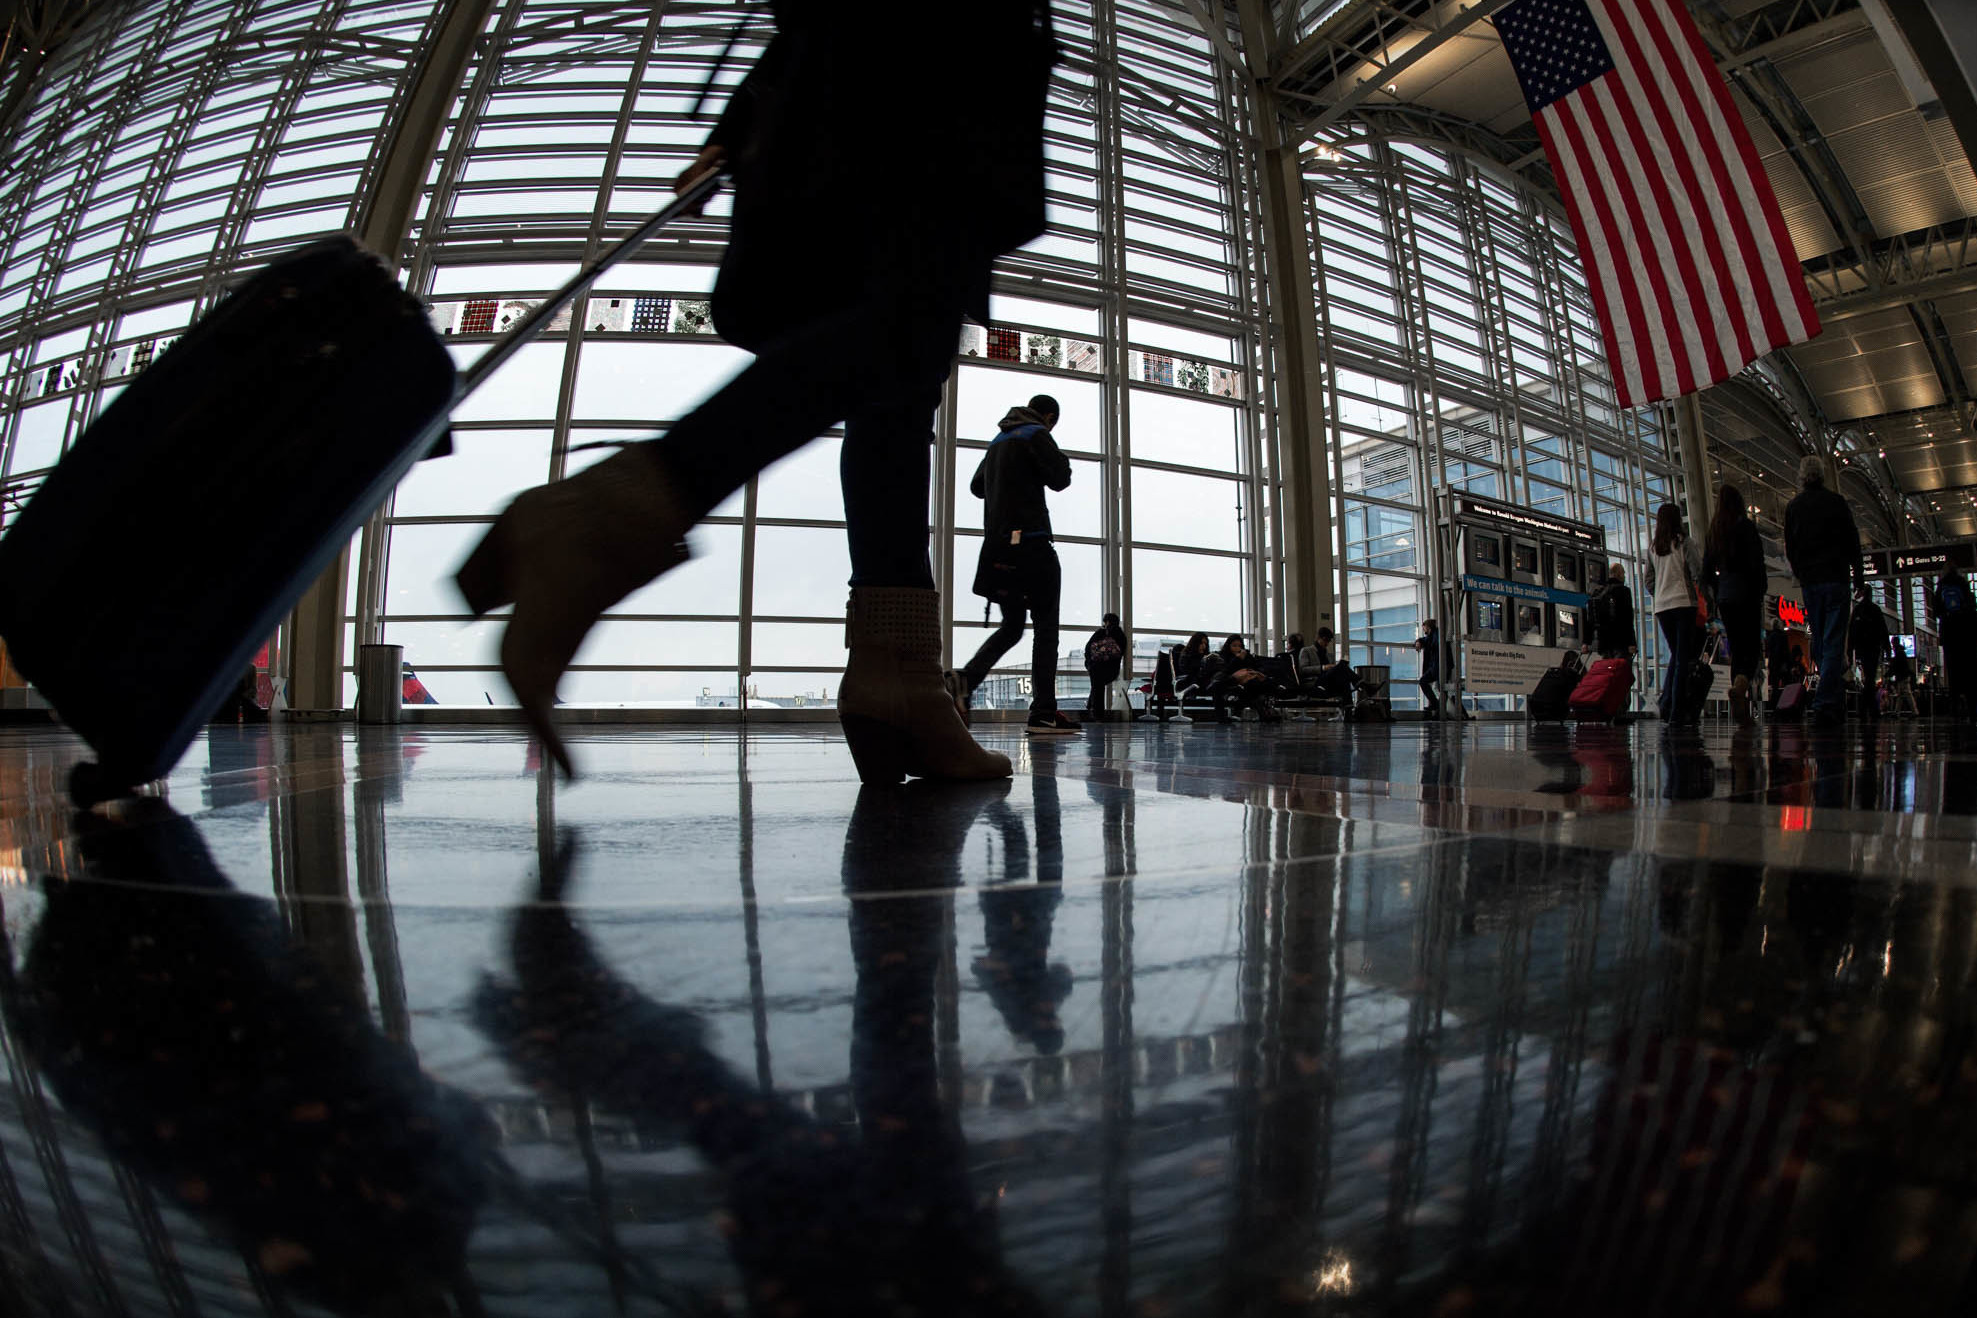 It was shoes on, no boarding pass or ID. But airport security forever  changed on 9/11 - OPB